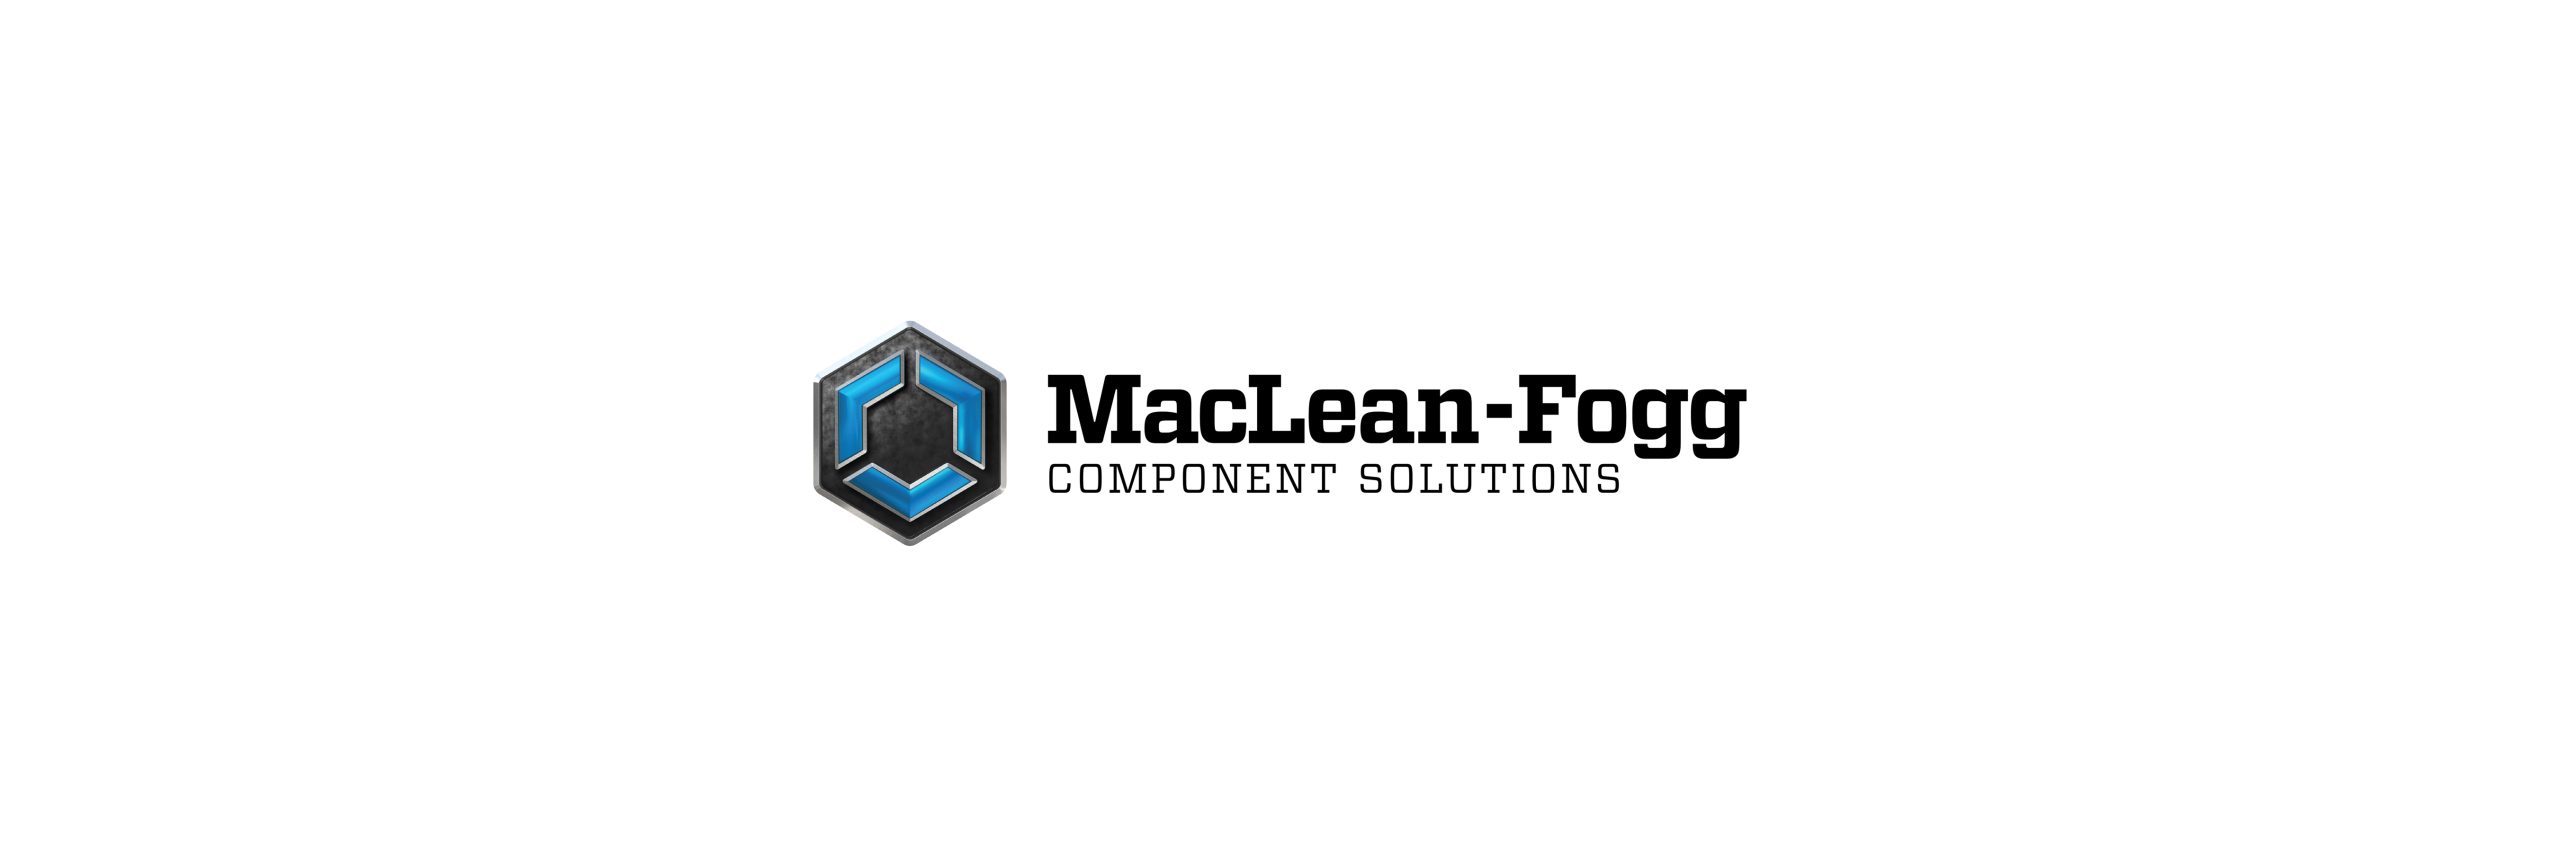 MacLean-Fogg Cans for a Cause Food Drive – Fastener Sales Team